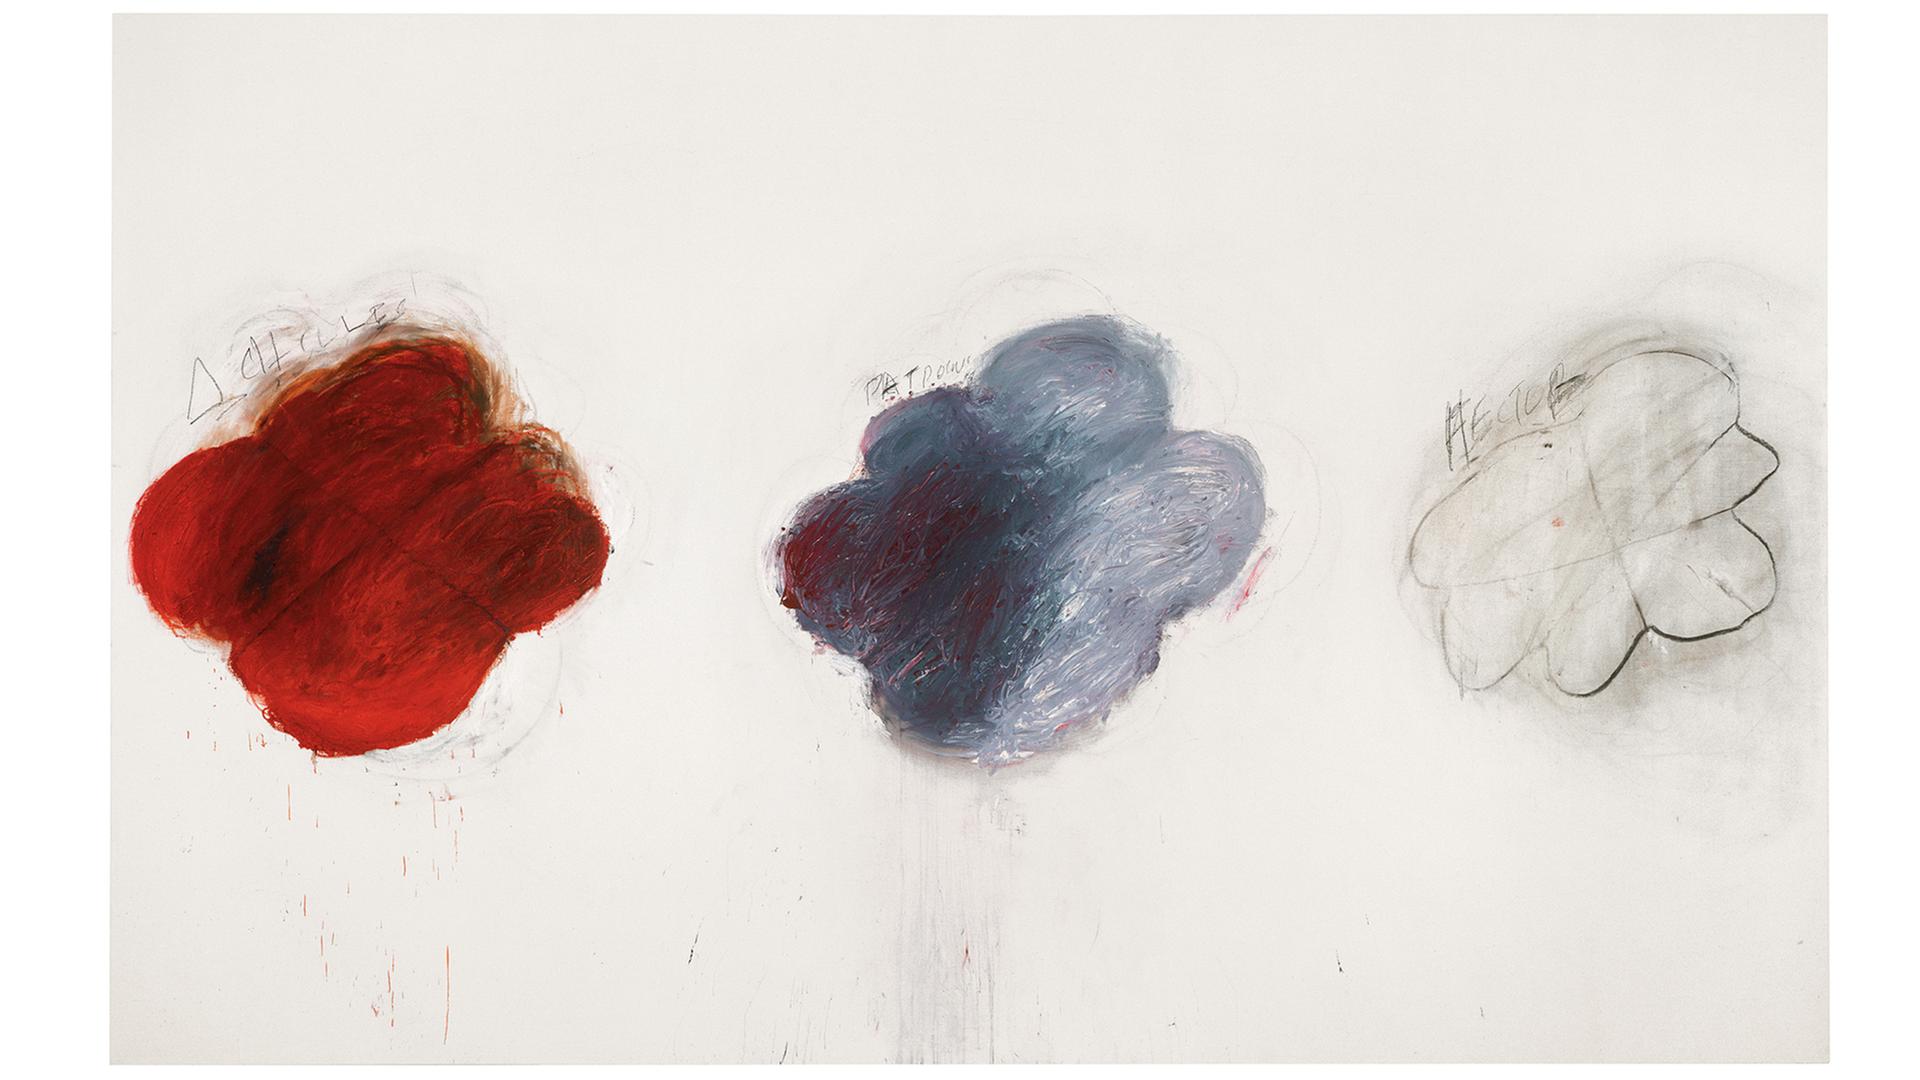 Cy Twombly: Fifty Days at Iliam Shades of Achilles, Patroclus and Hector (1978), Part VI